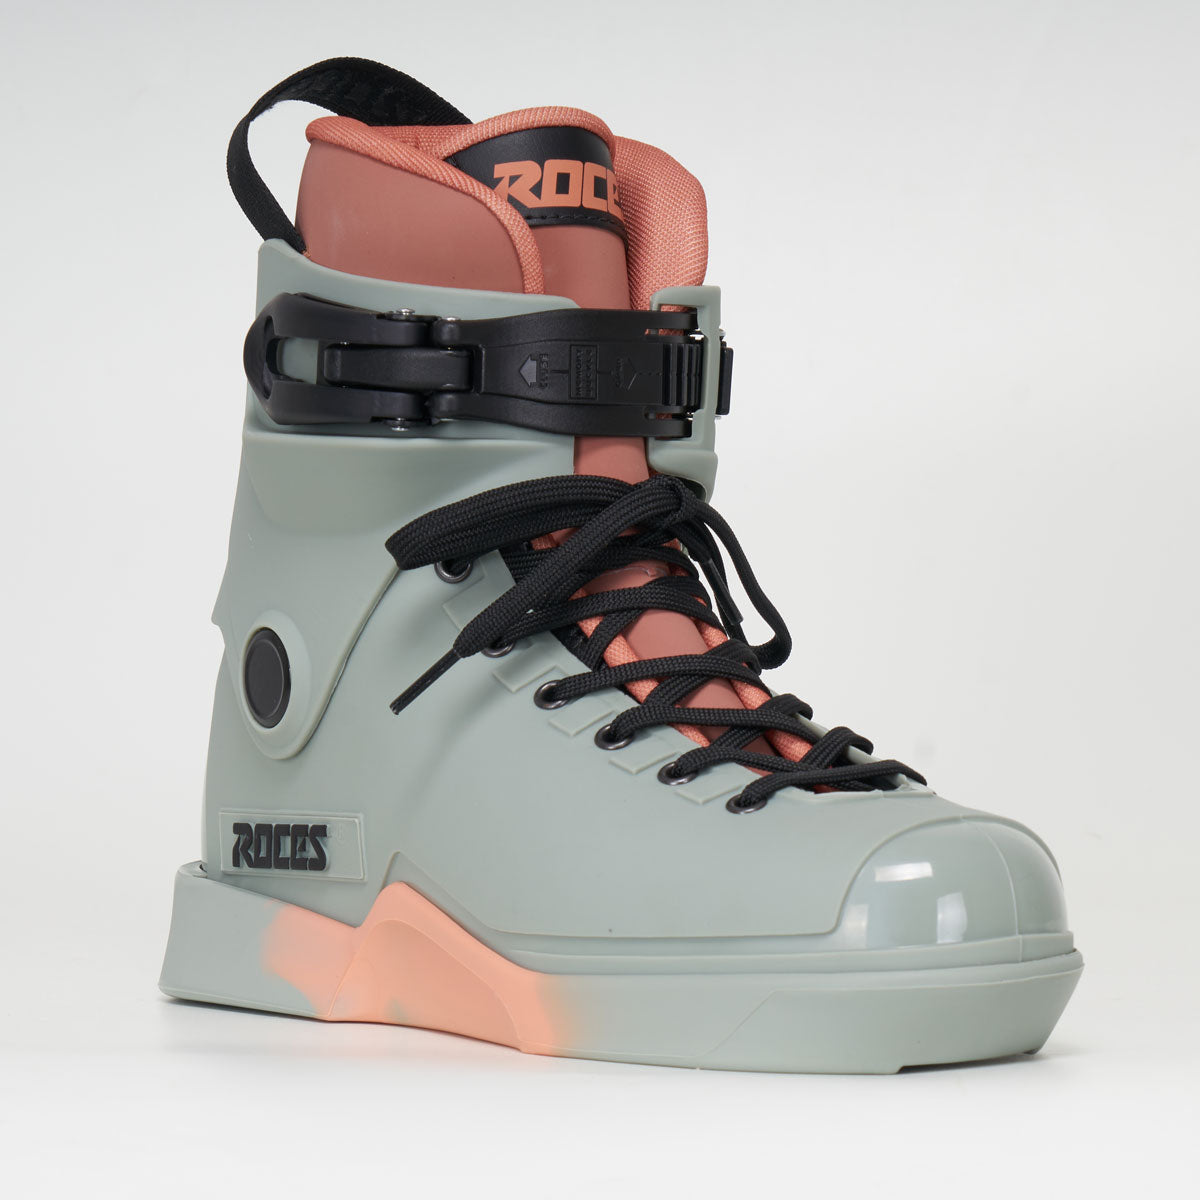 Roces M12 LO Team Juno Skates - Boot Only